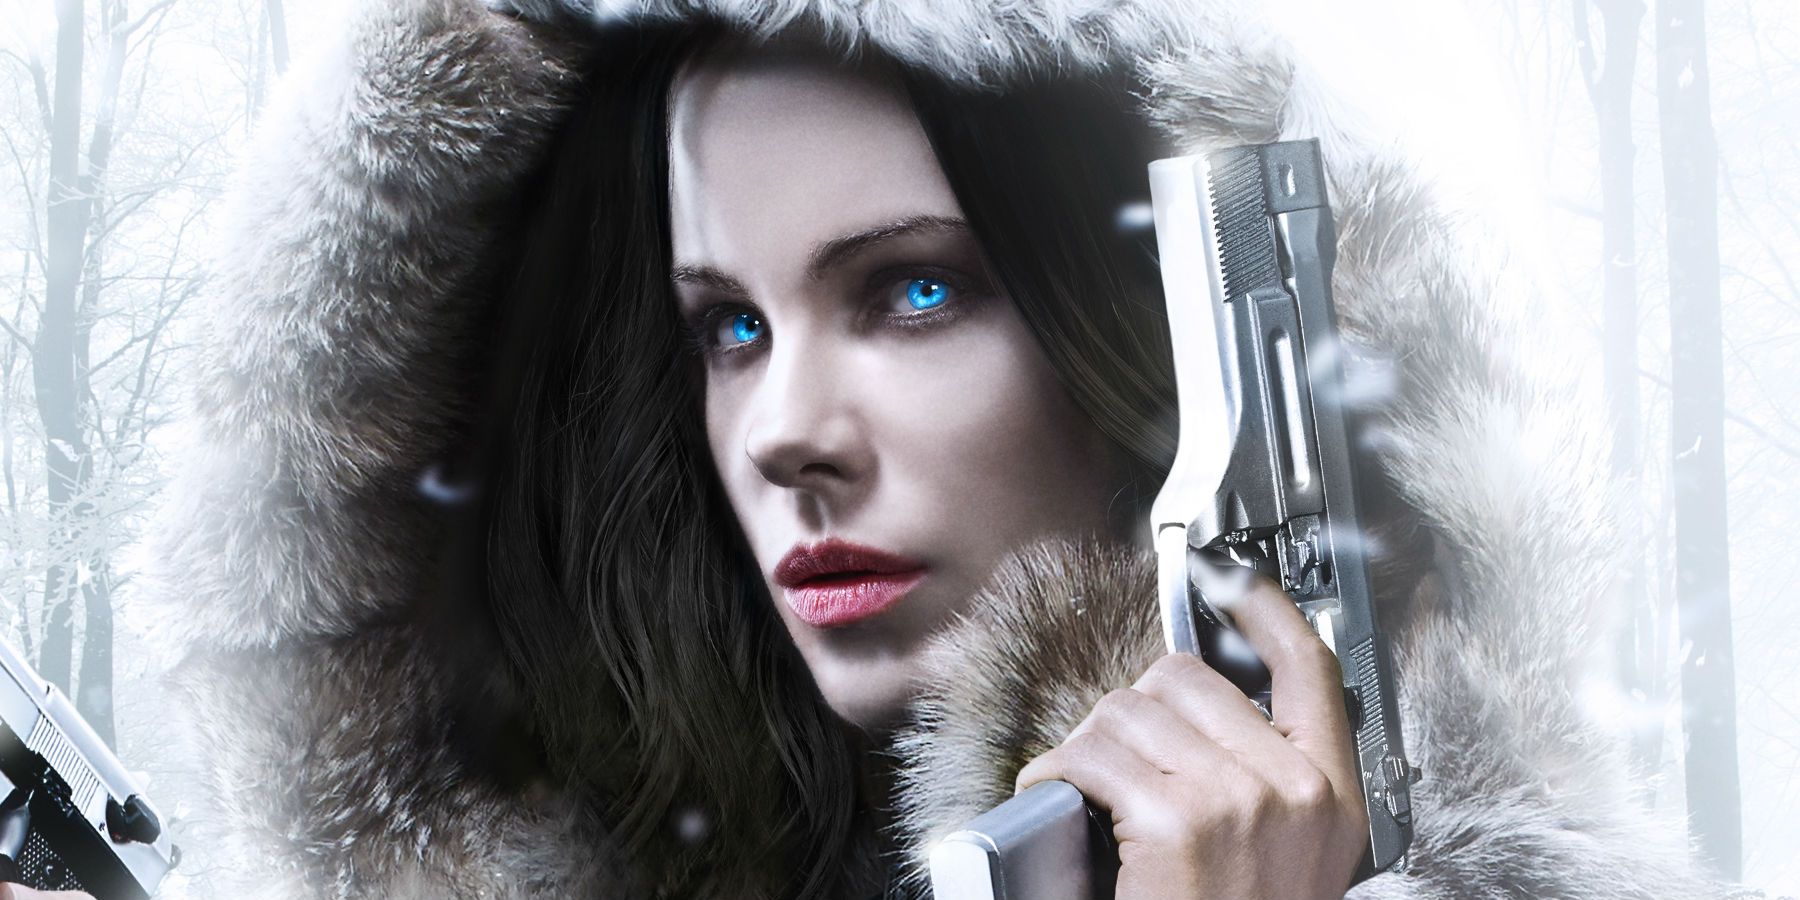 Every Kate Beckinsale Action Movie Ranked From Worst To Best